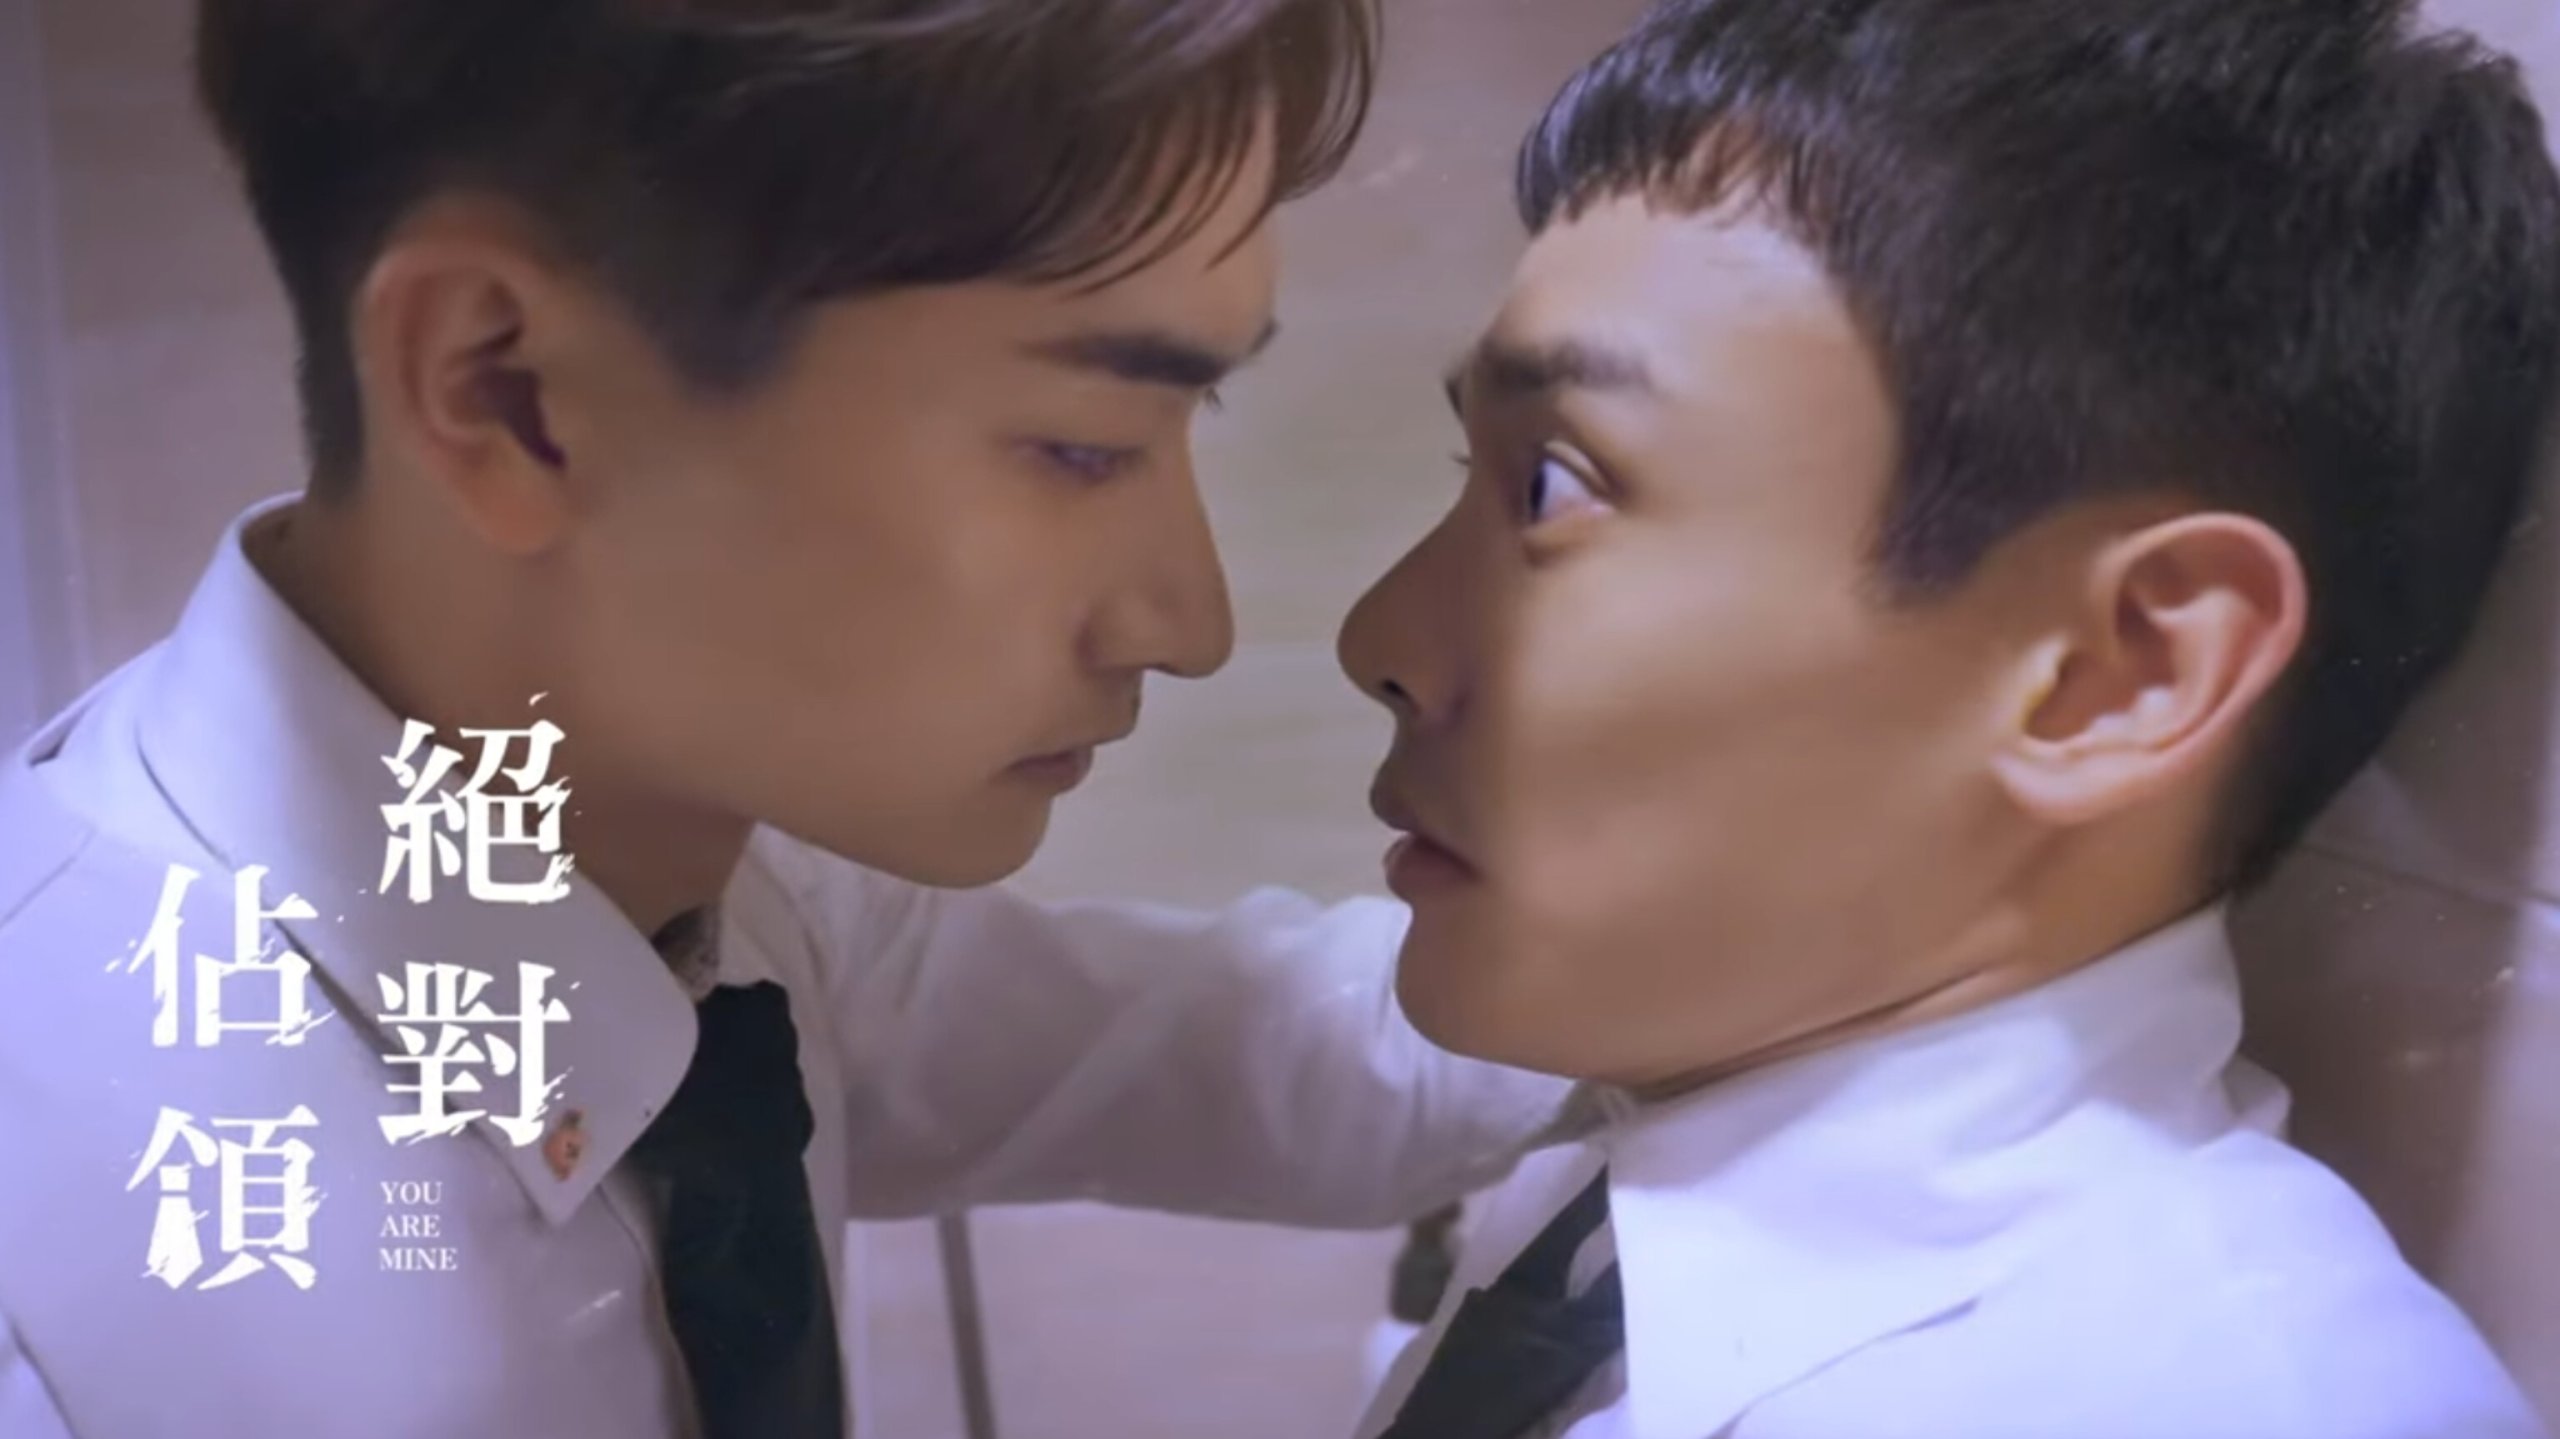 WATCH: An Office Romance Filled With Domination and Shyness Unfolds in 'You  Are Mine' - BLTai